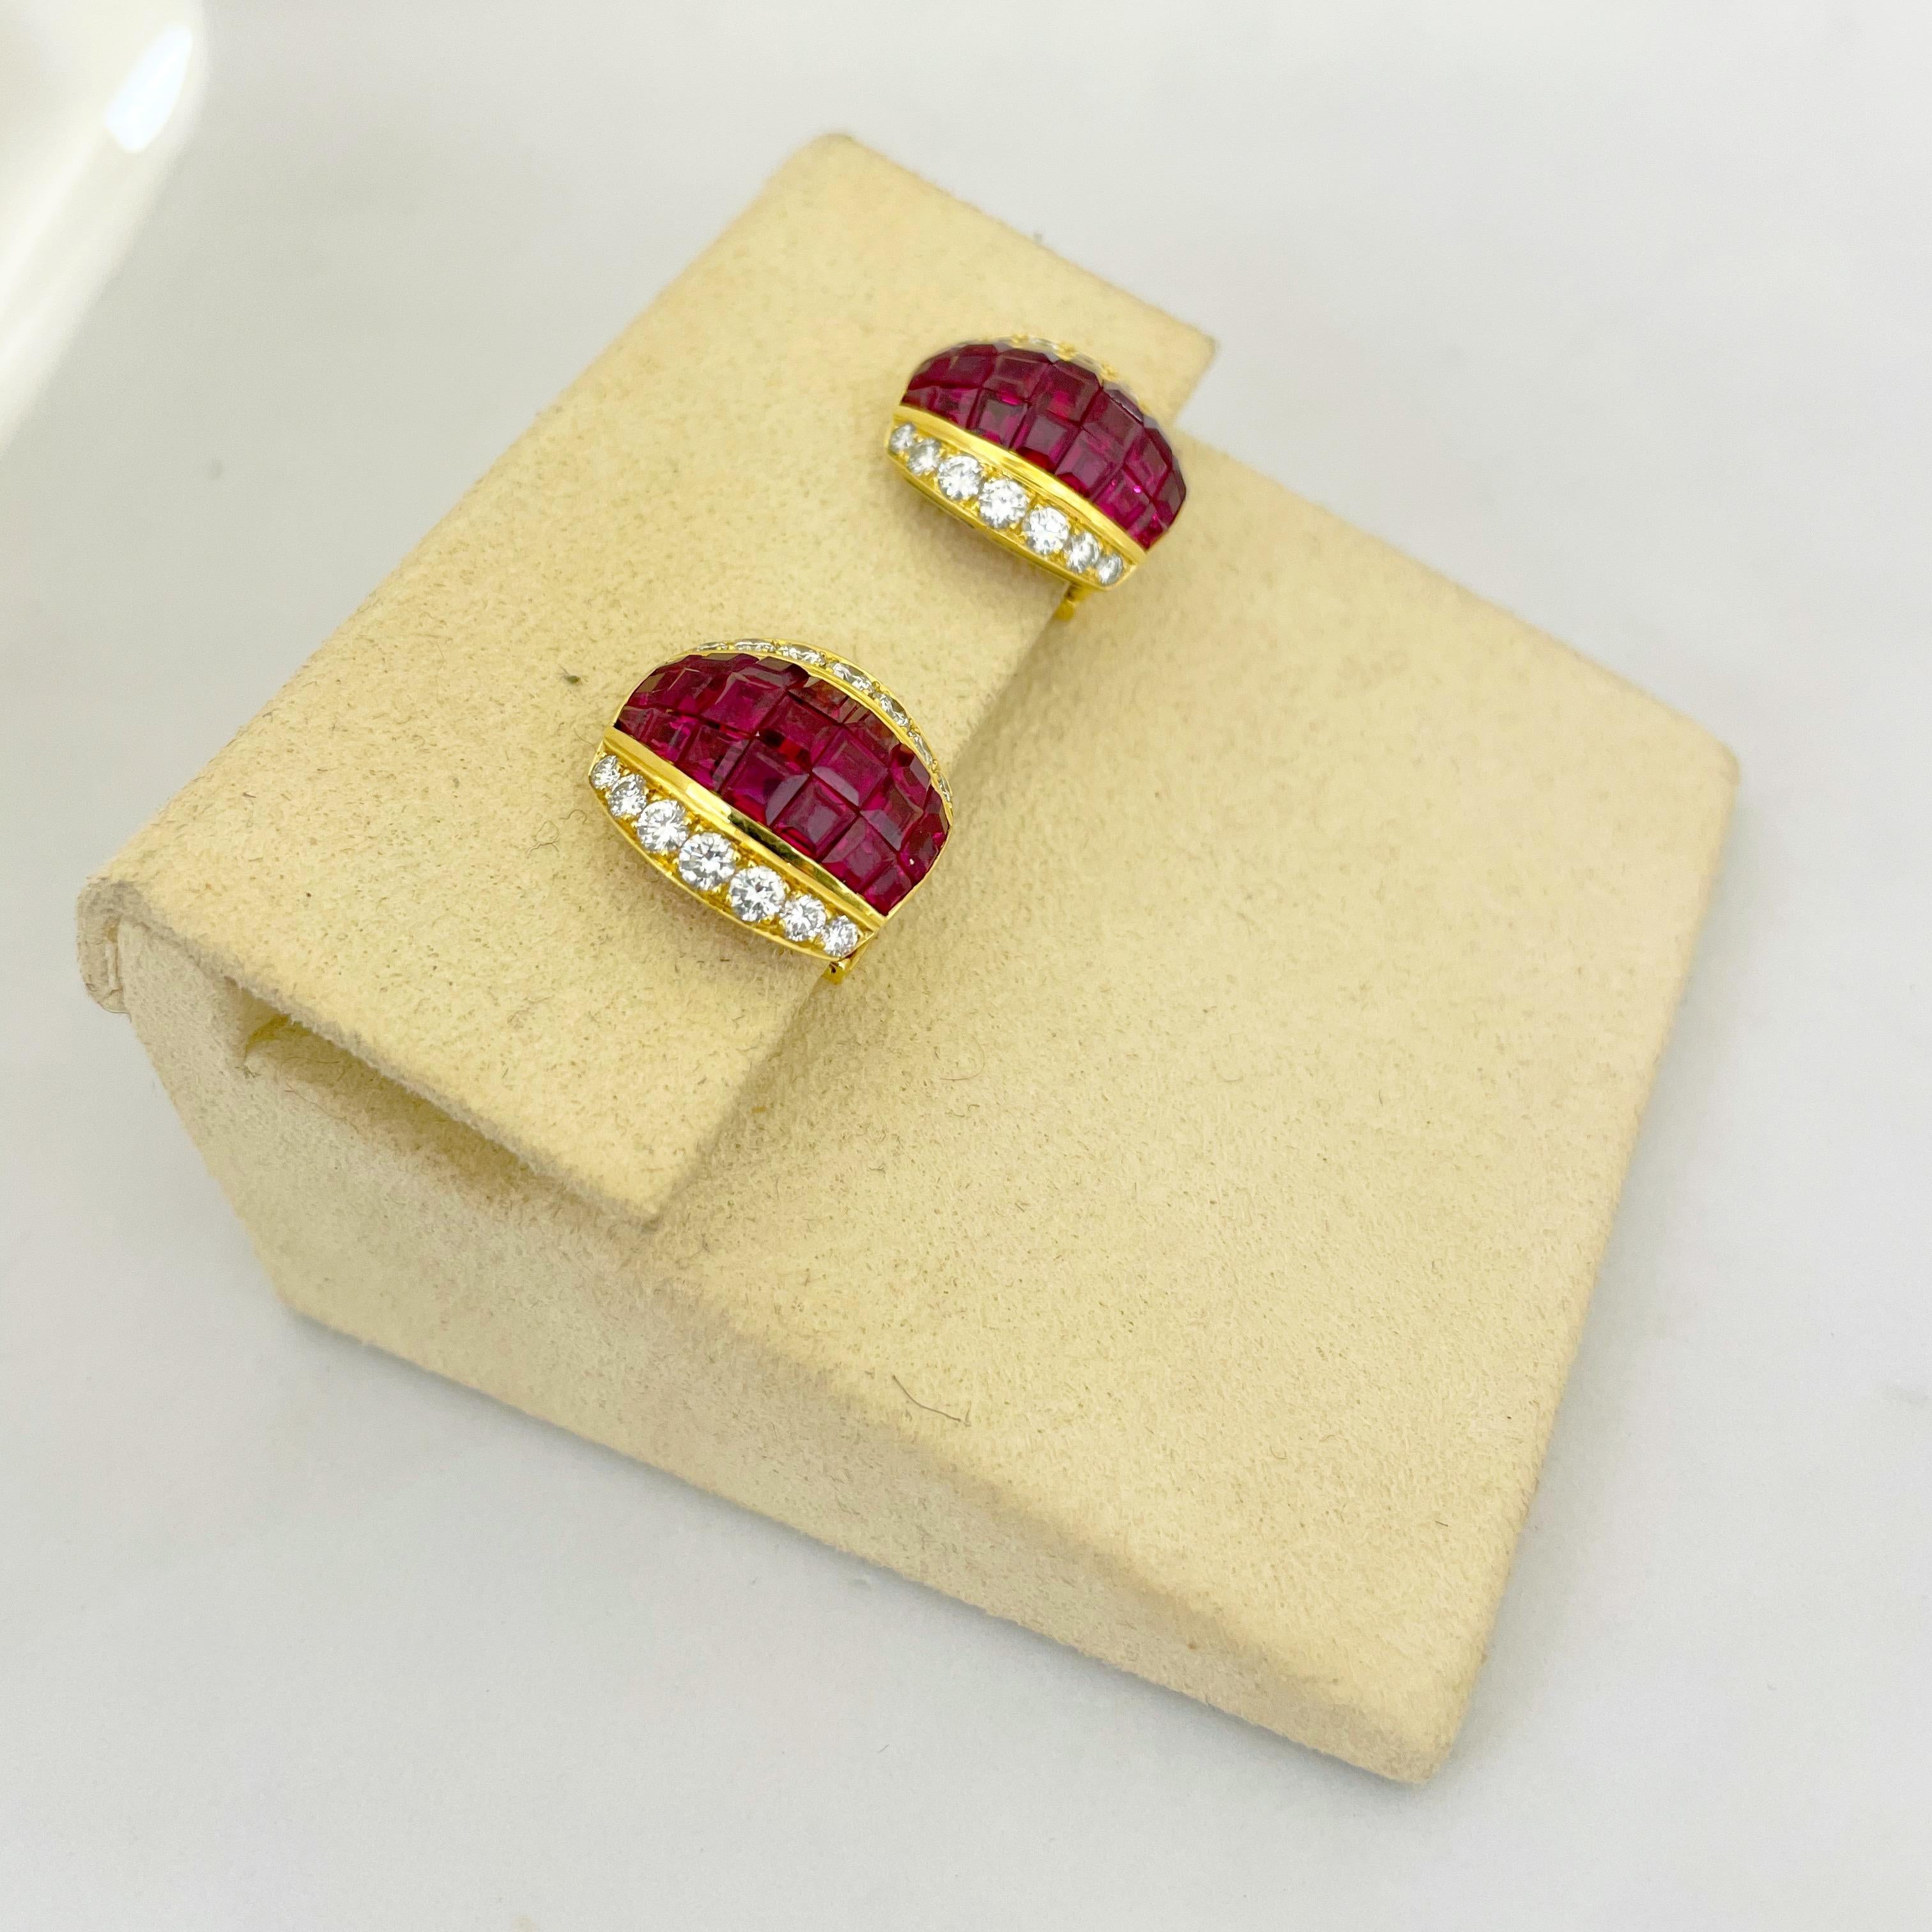 These 18 karat yellow gold earrings have been magnificently set with 3 rows of invisibly set rubies. Round white brilliant diamonds border the rubies on each side . These earrings have collapsible posts making them suitable for pierced and non